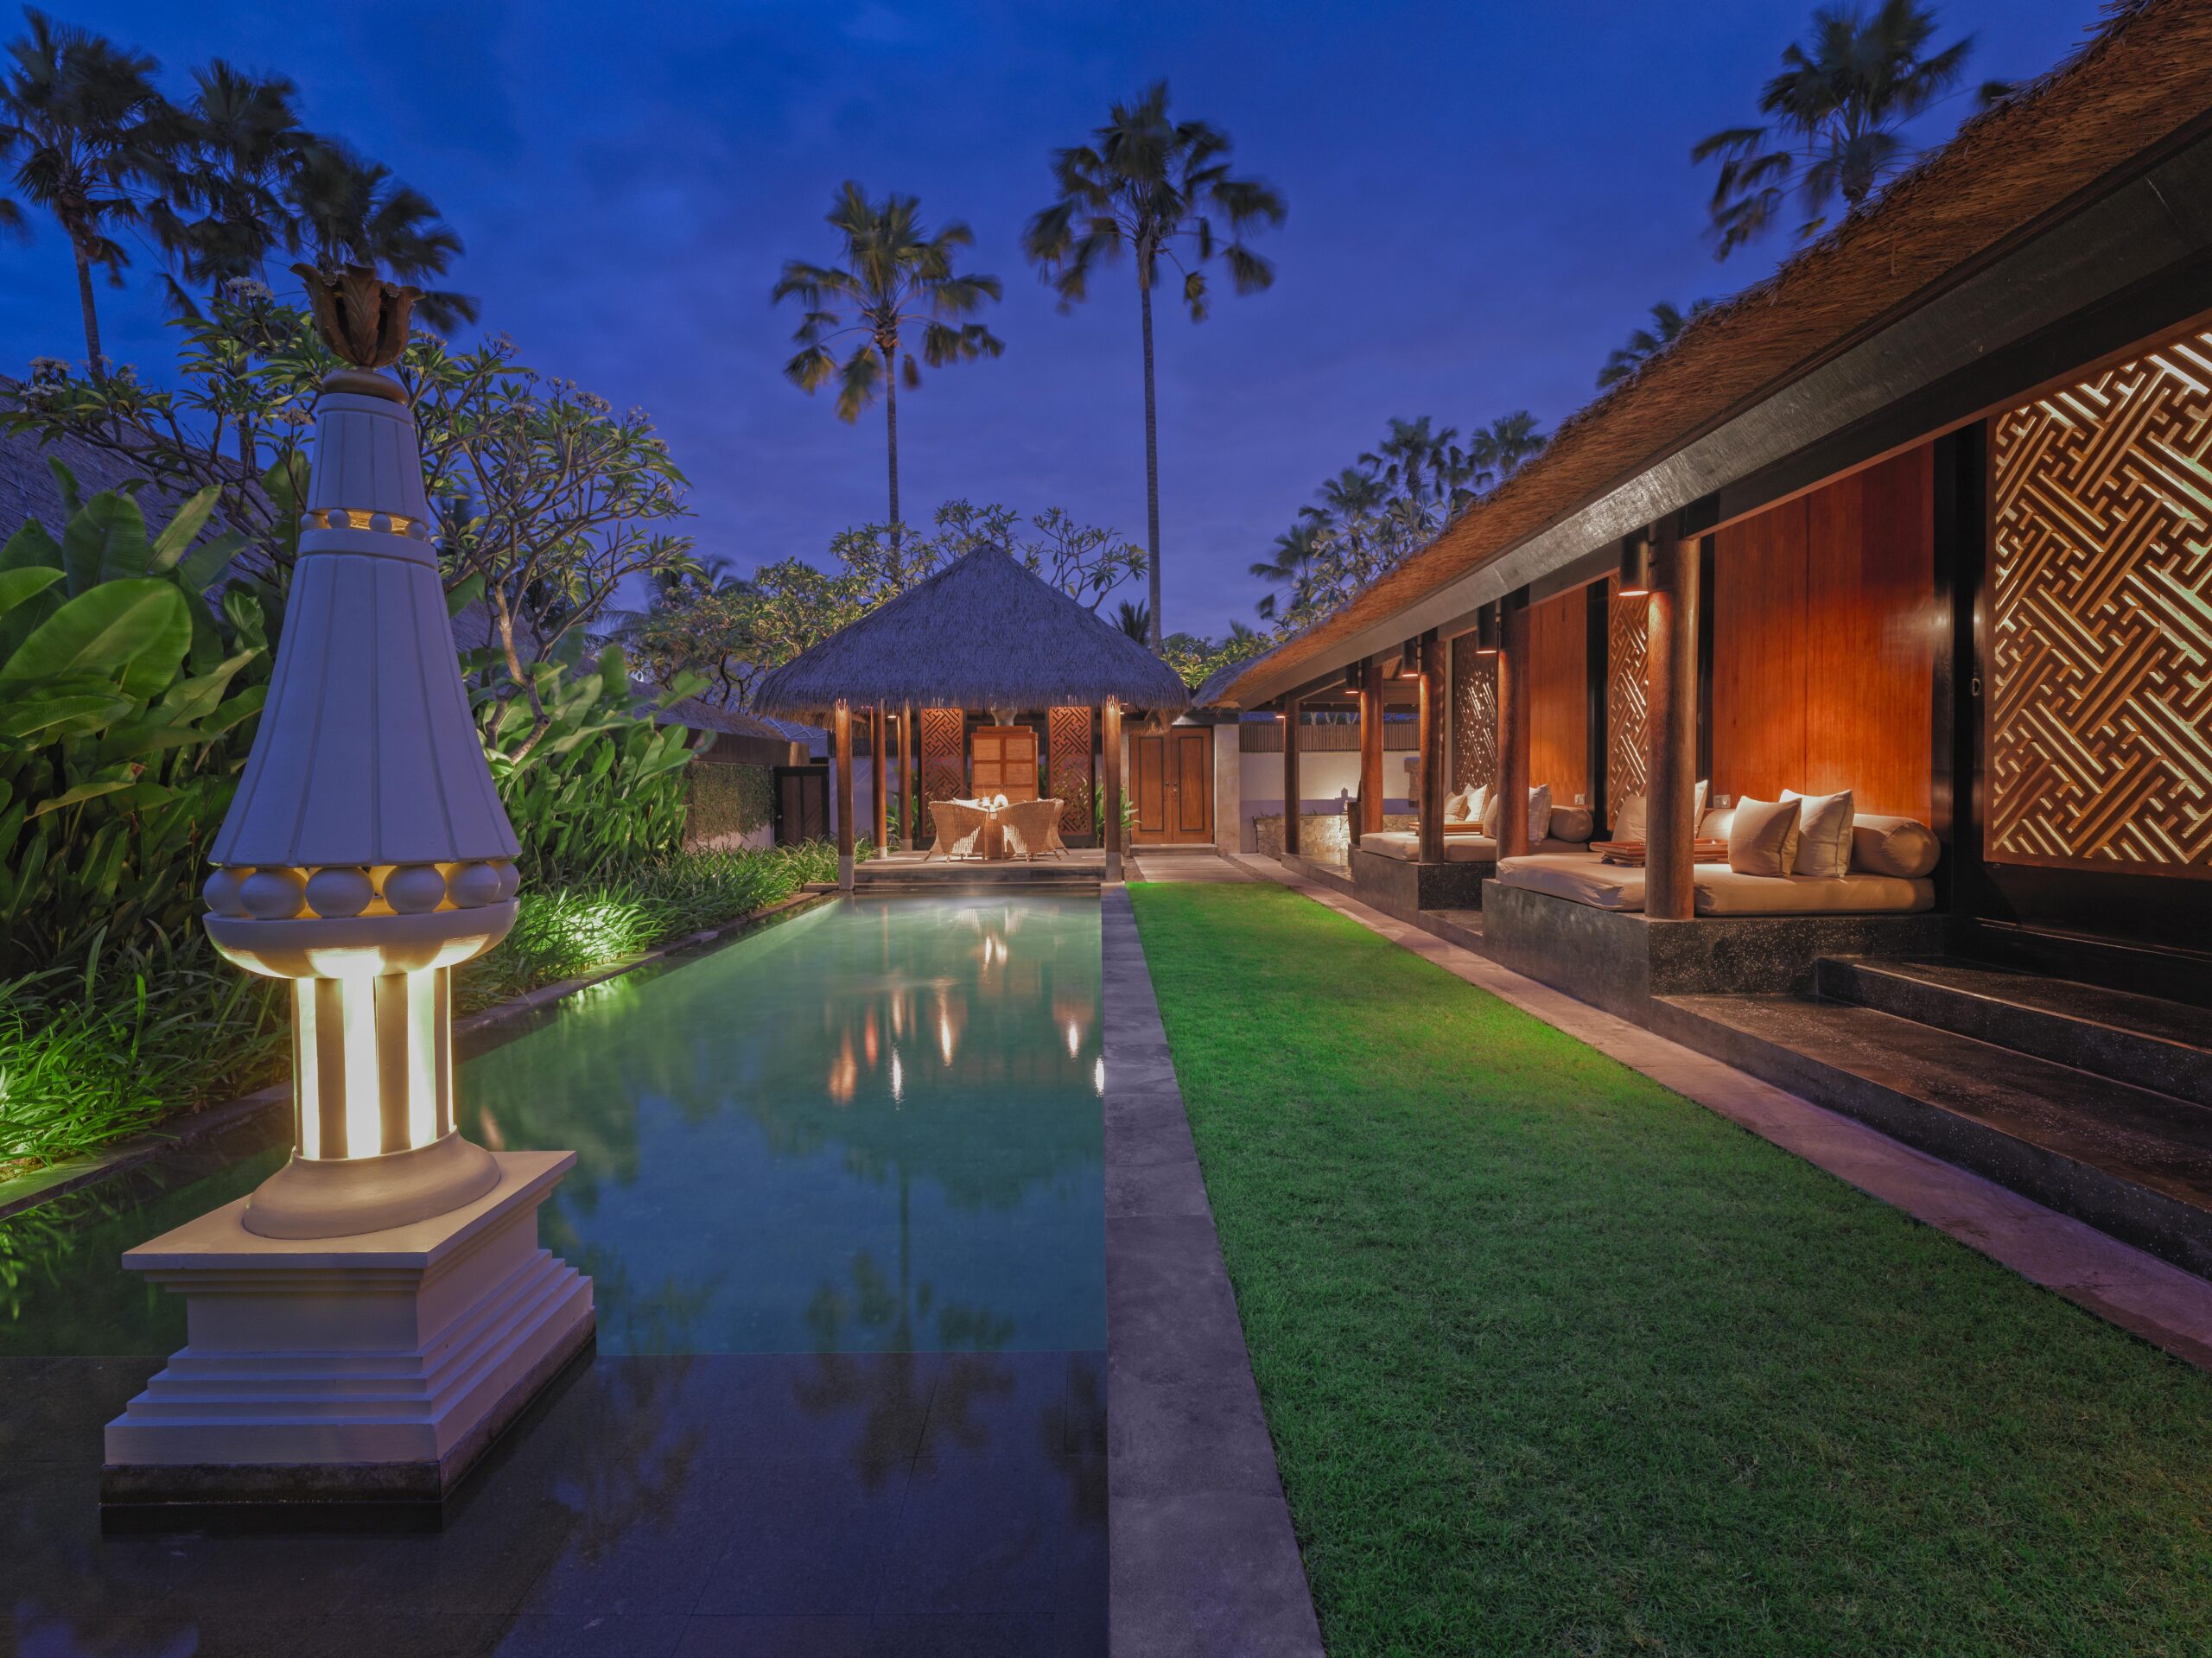 The Legian Hotels in Indonesia appoints One Rep Global as its India market representative